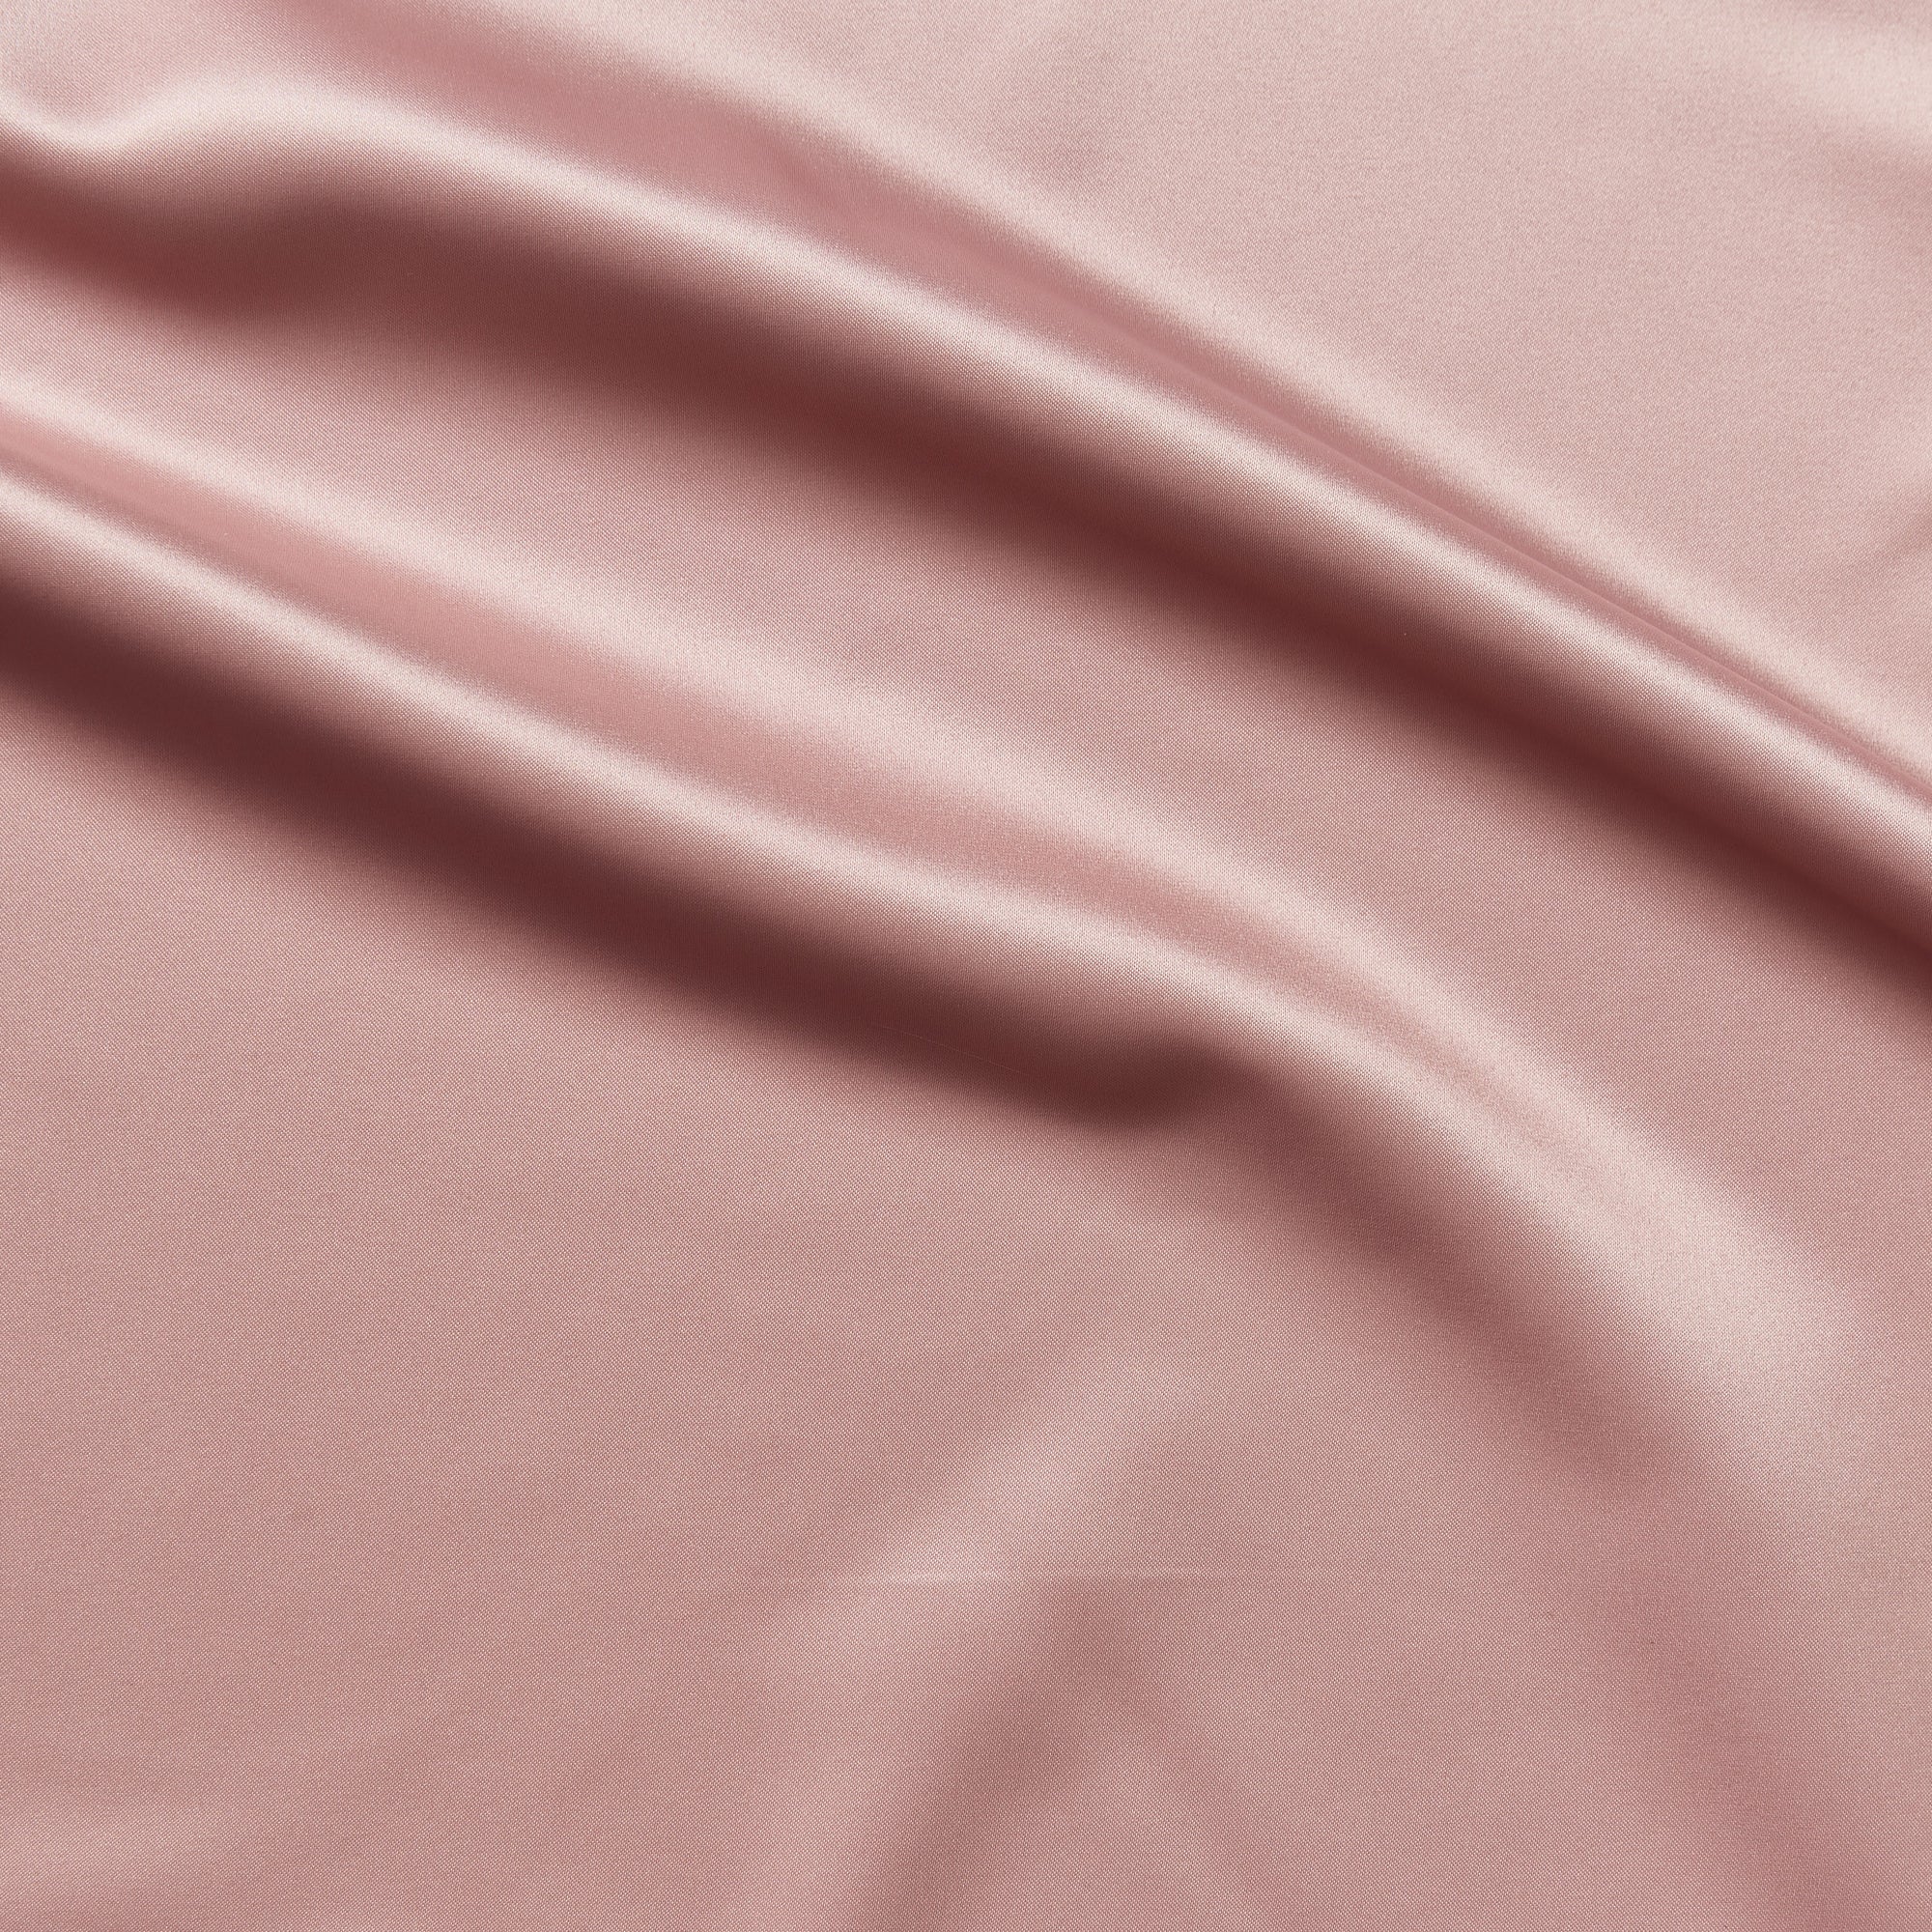 countess presenting the antique color version of a crisp satin pure polyester fabric with moderate drape suitable for dresses